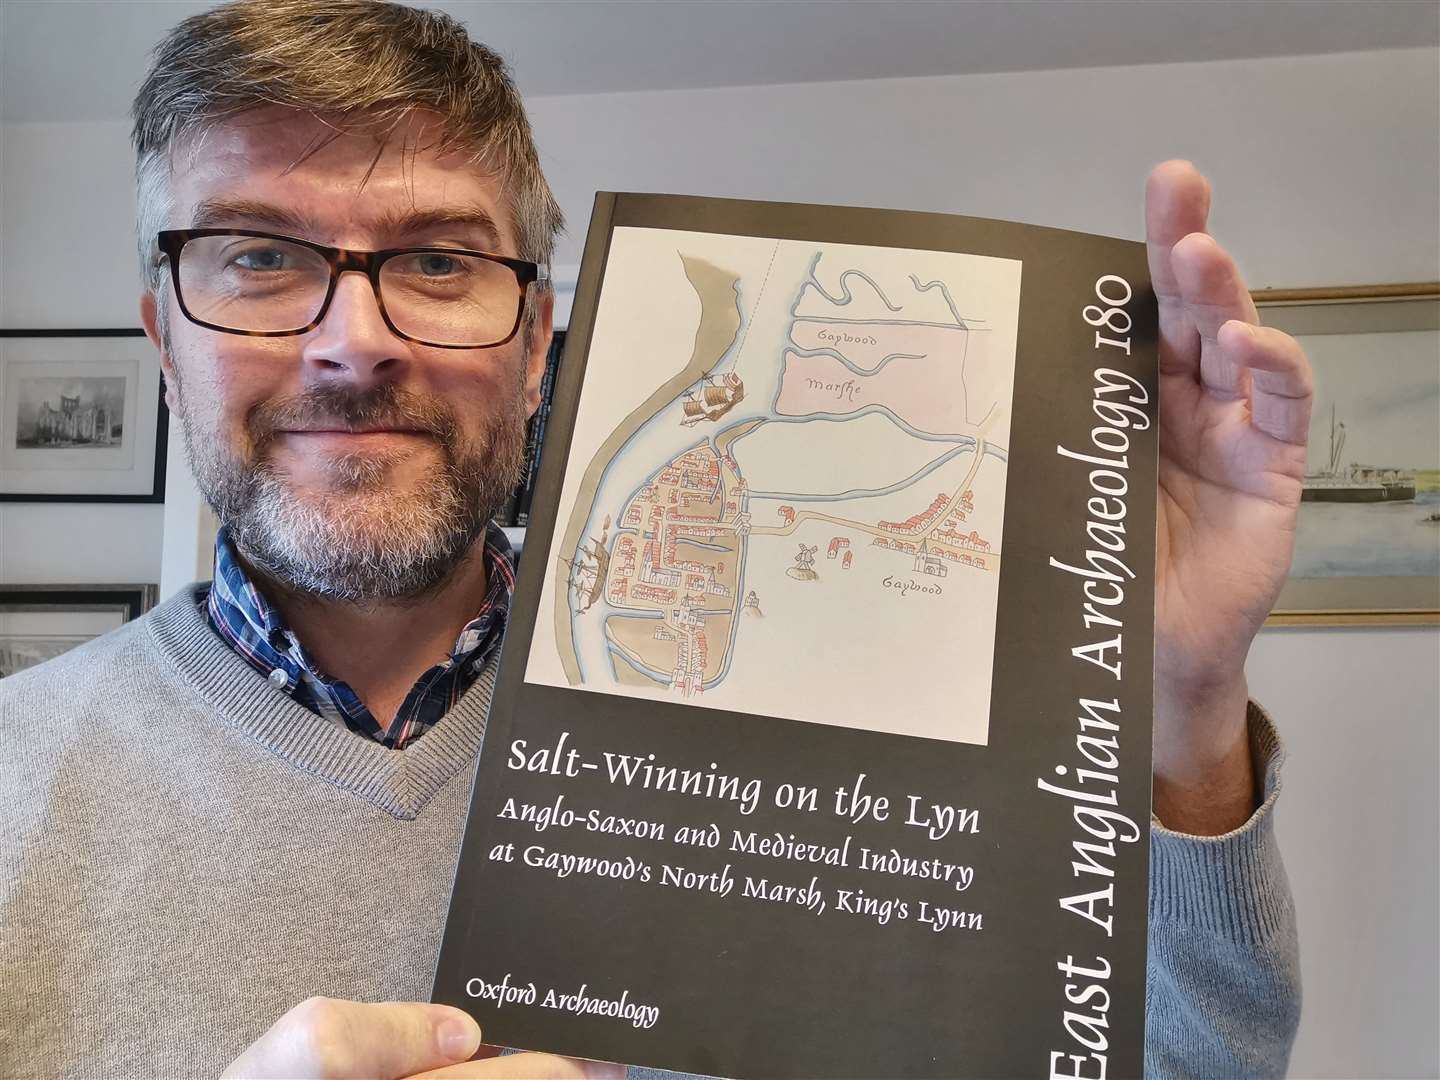 Graeme Clarke with the new book about salt-winning on Gaywood's North Marsh. Picture: West Norfolk Council